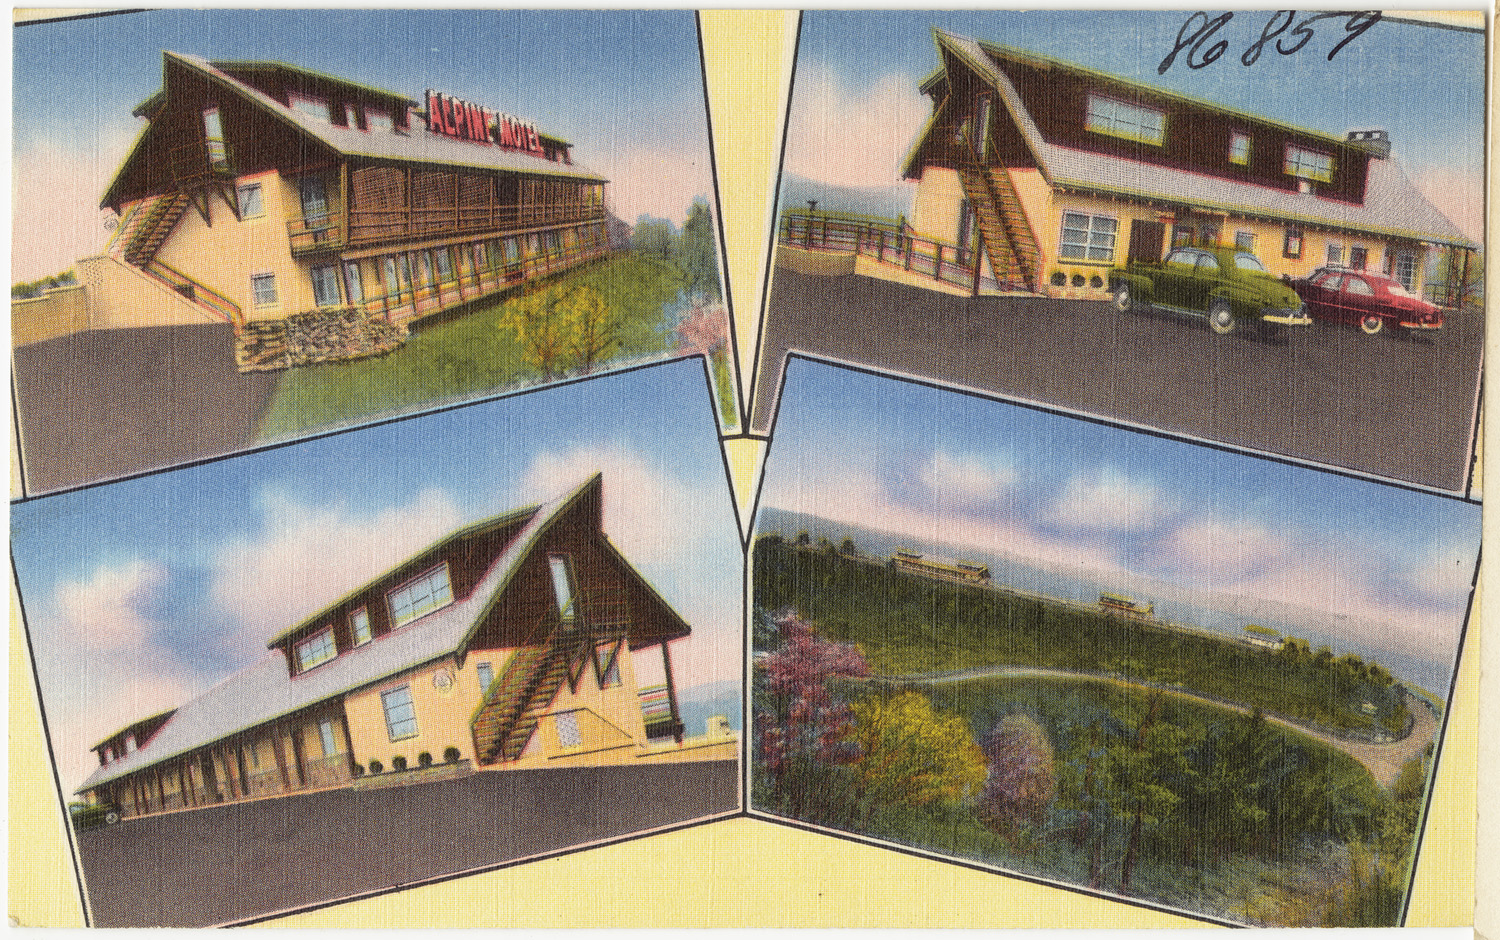 the postcard shows the houses and trees